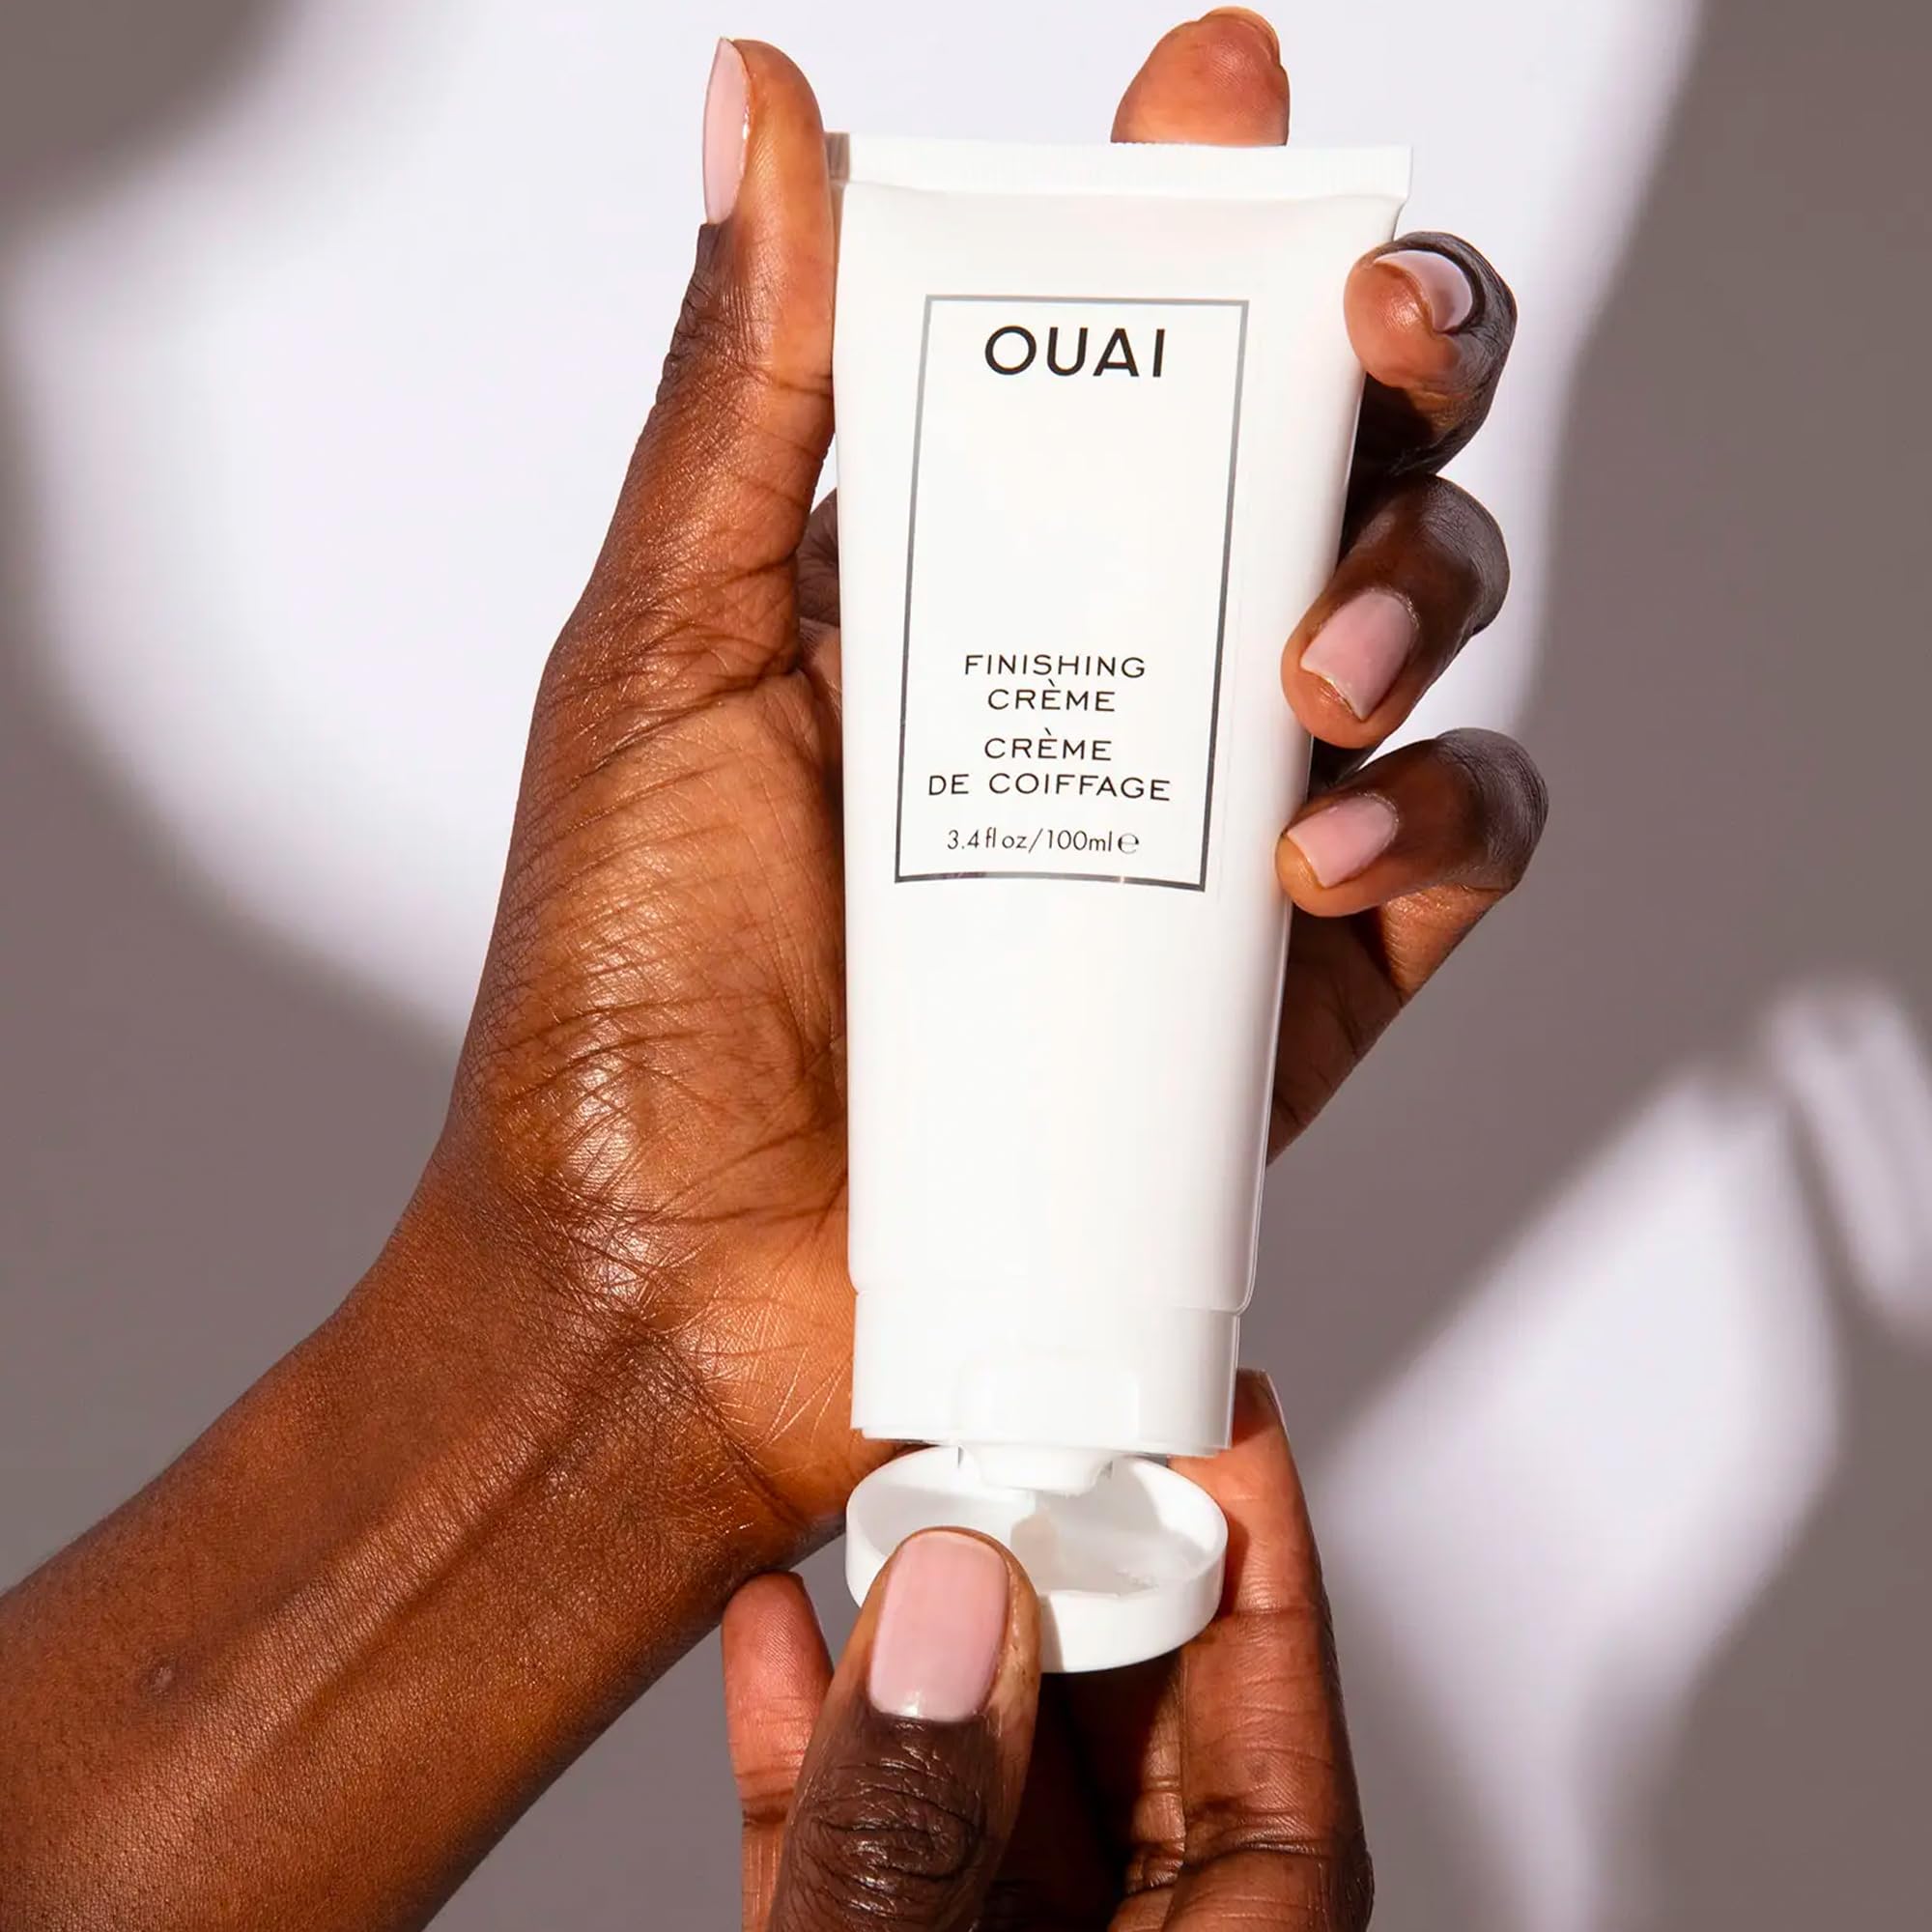 OUAI Finishing Creme - Lightweight Hydrating Cream - Protects from Heat Styling, Smooths Dry, Split Ends, Tames Frizz & Adds Shine and Body - Free of Parabens and Phthalates - 3.4 fl oz